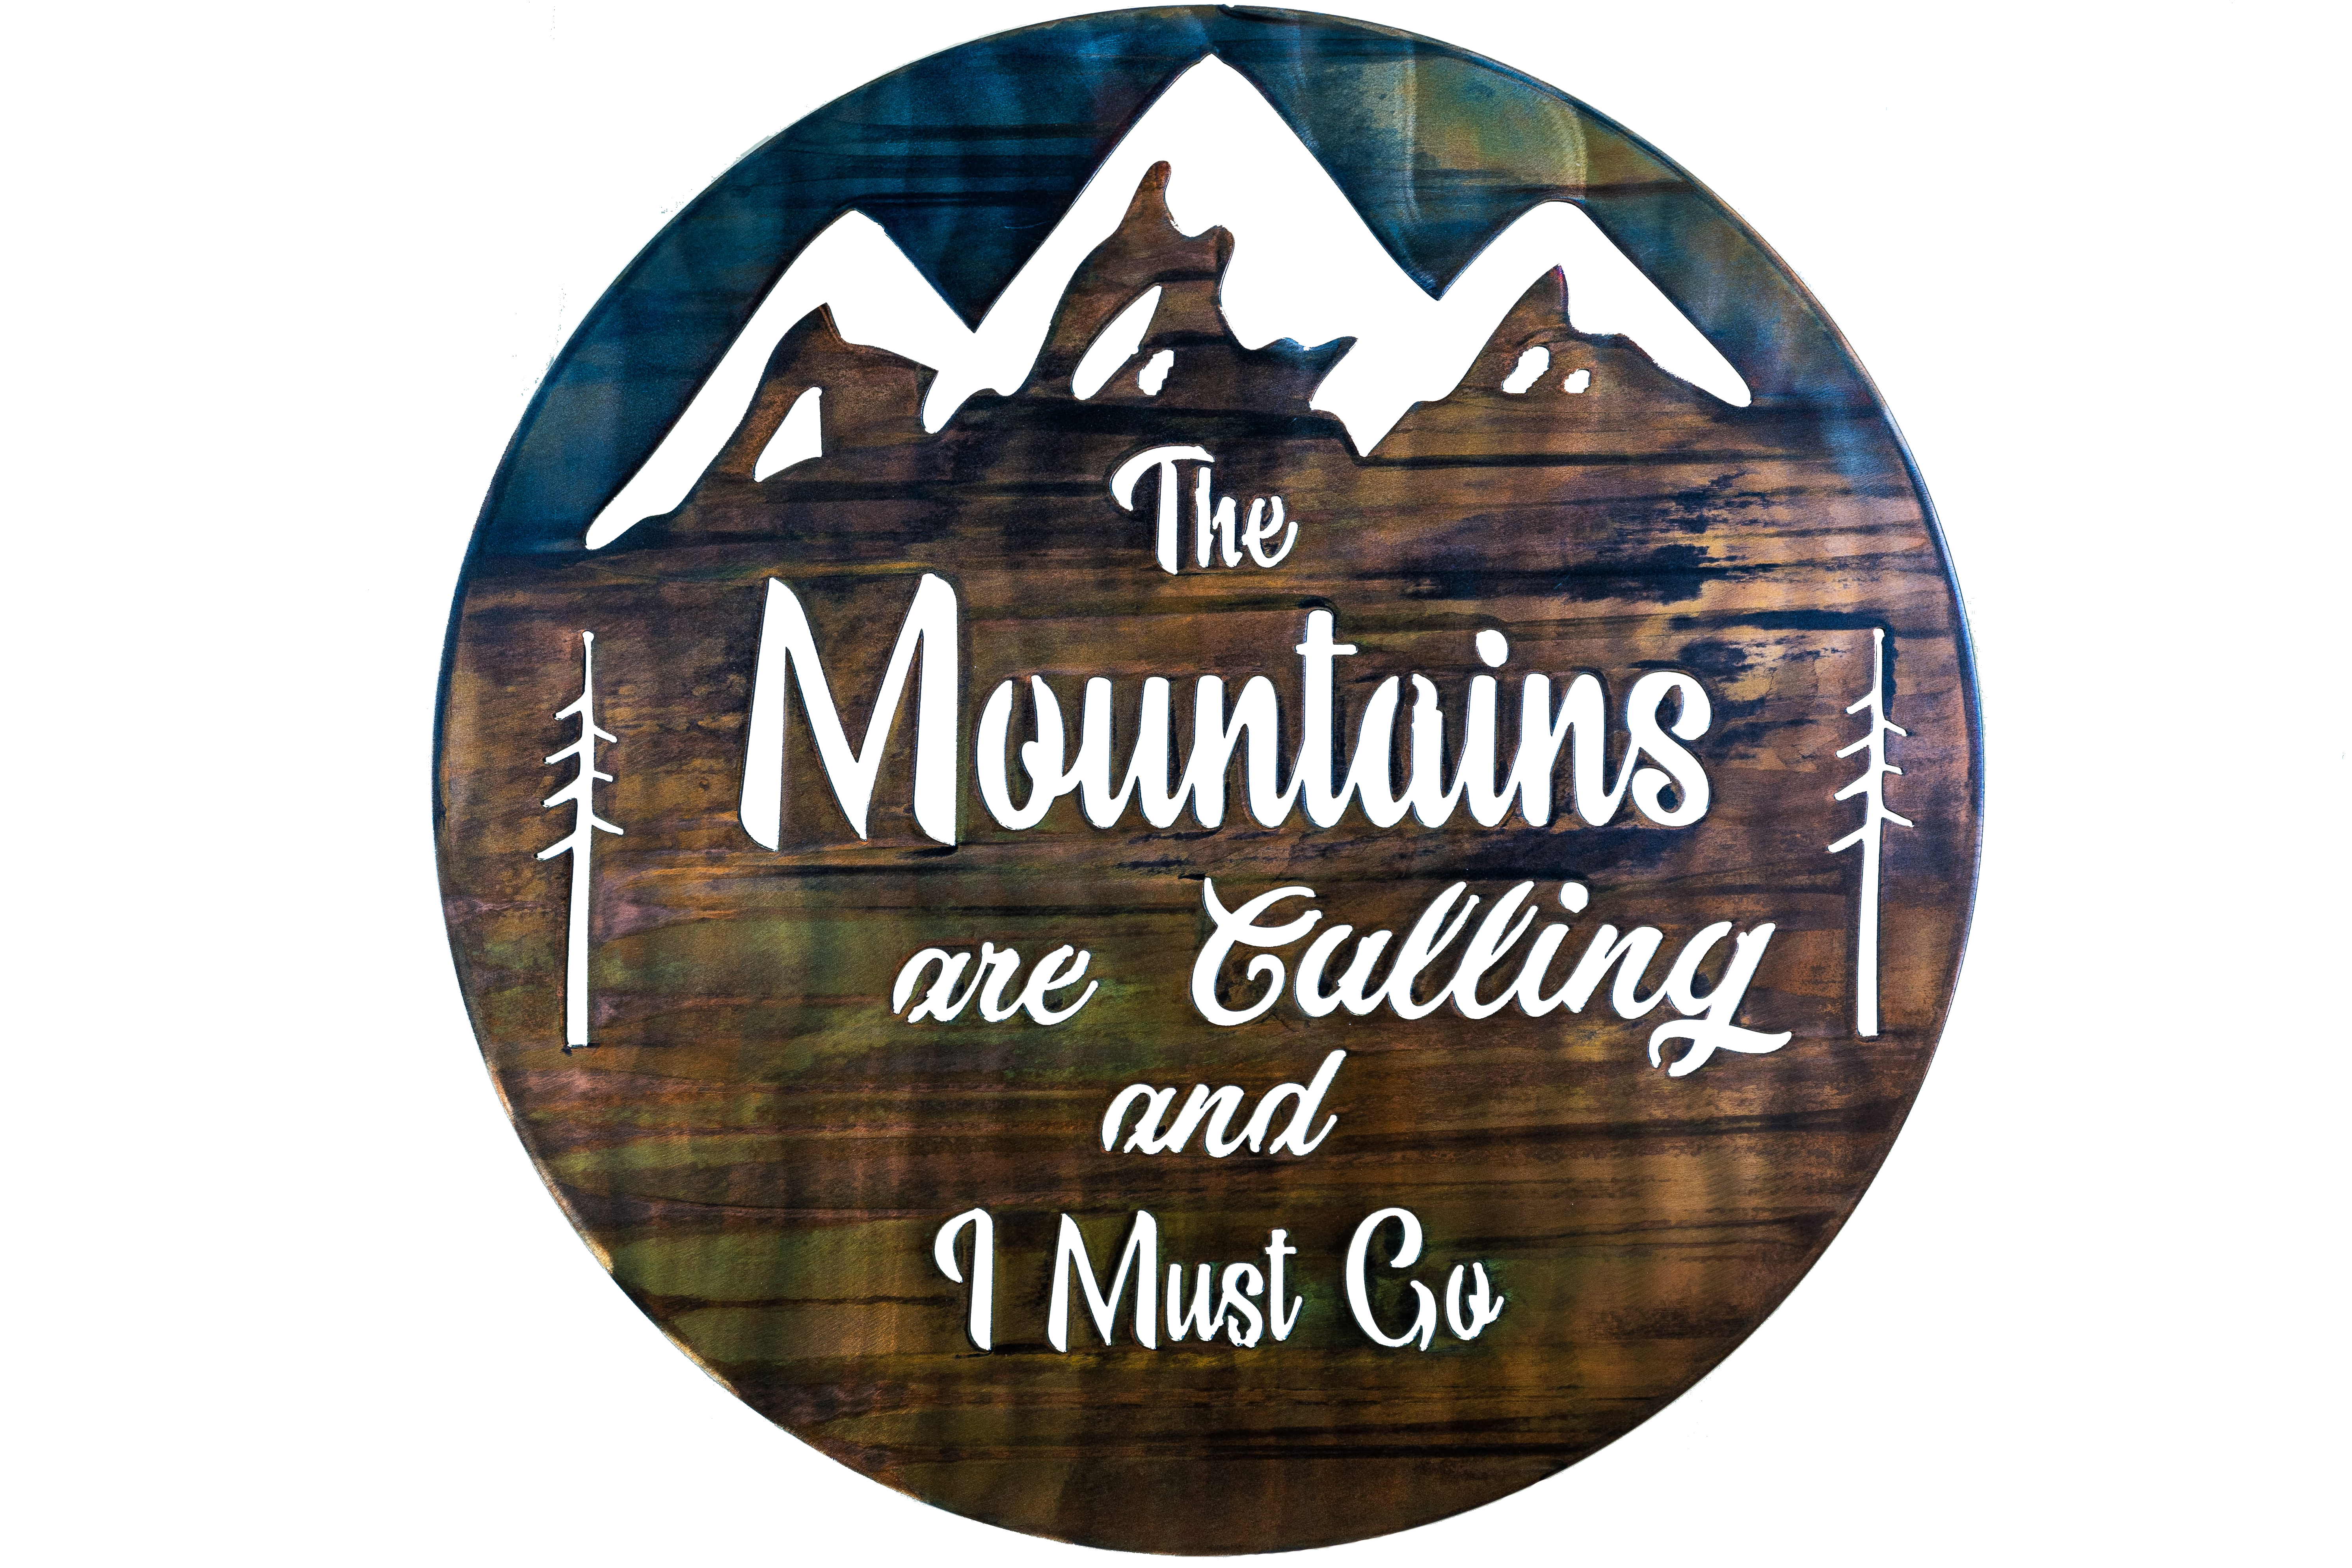 The Mountains are calling and I must go metal wall art is a circular piece of metal with the phrase cut into the metal with mountains in the background.